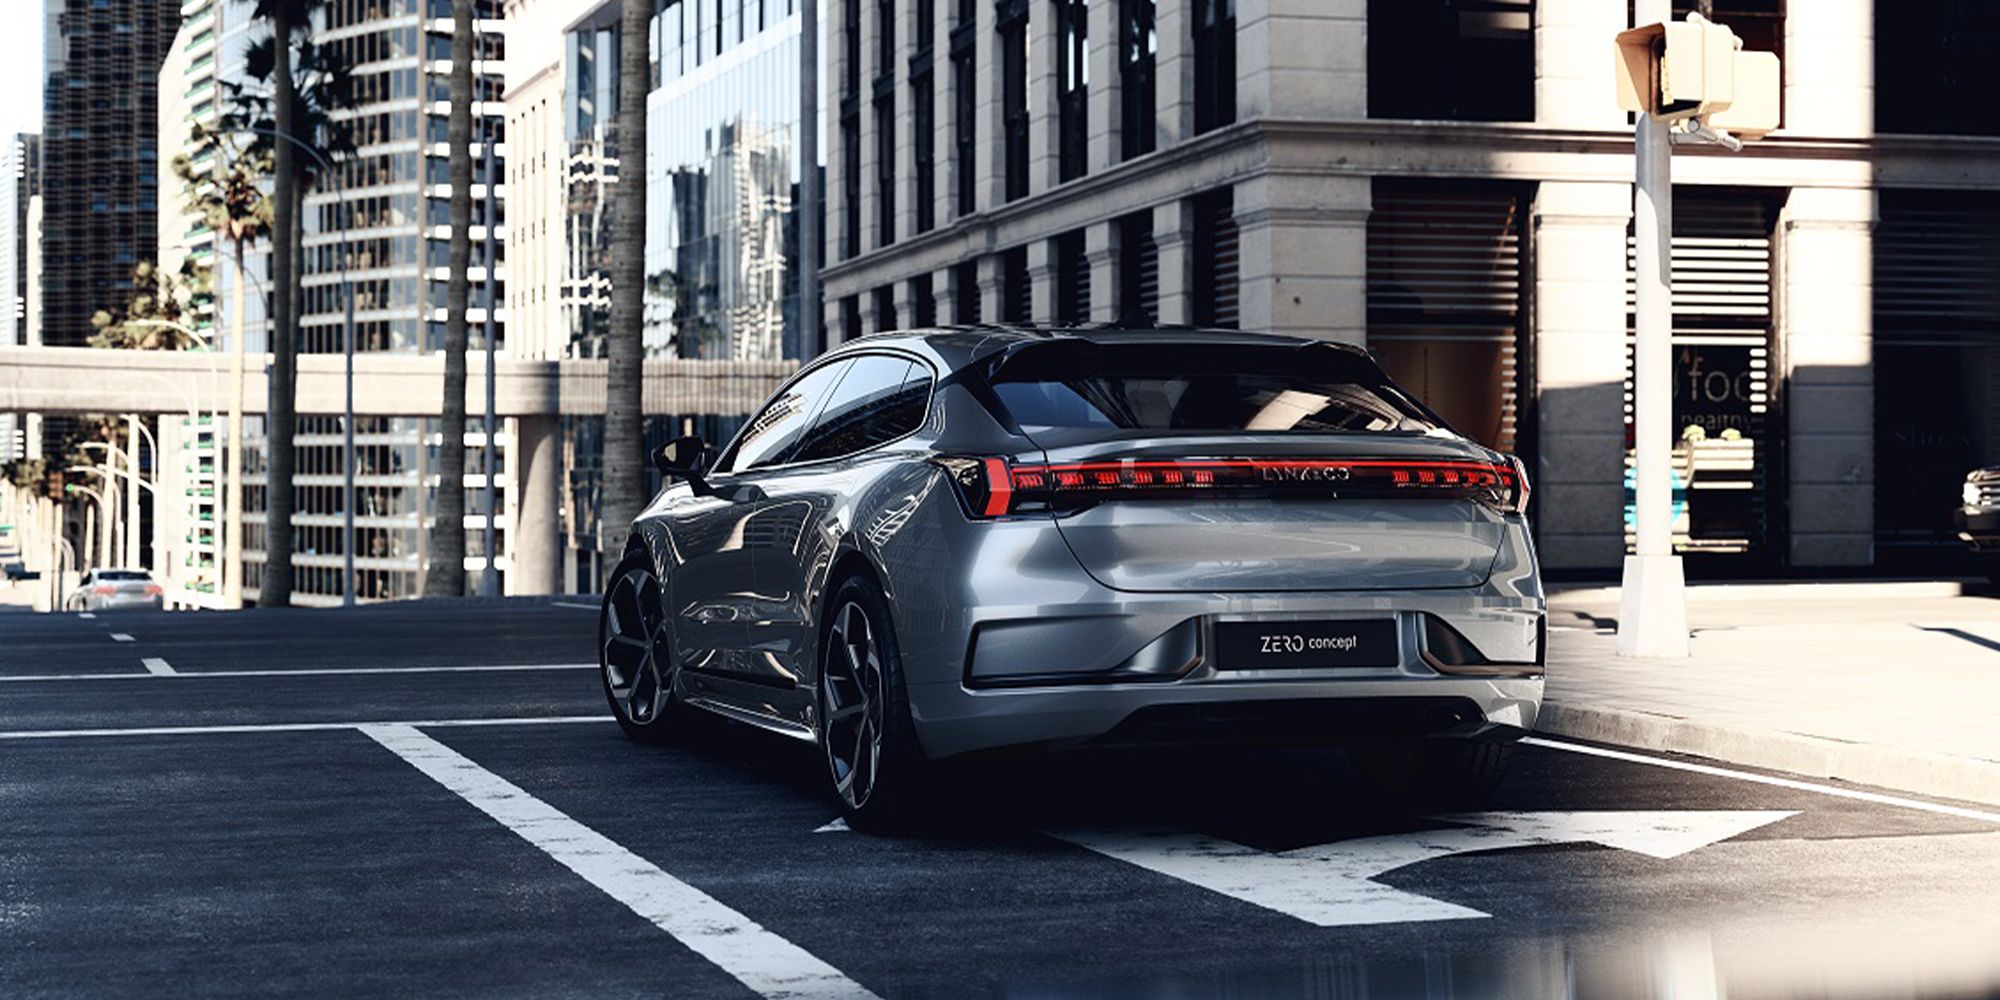 The rear of the Lynk & Co Zero Concept